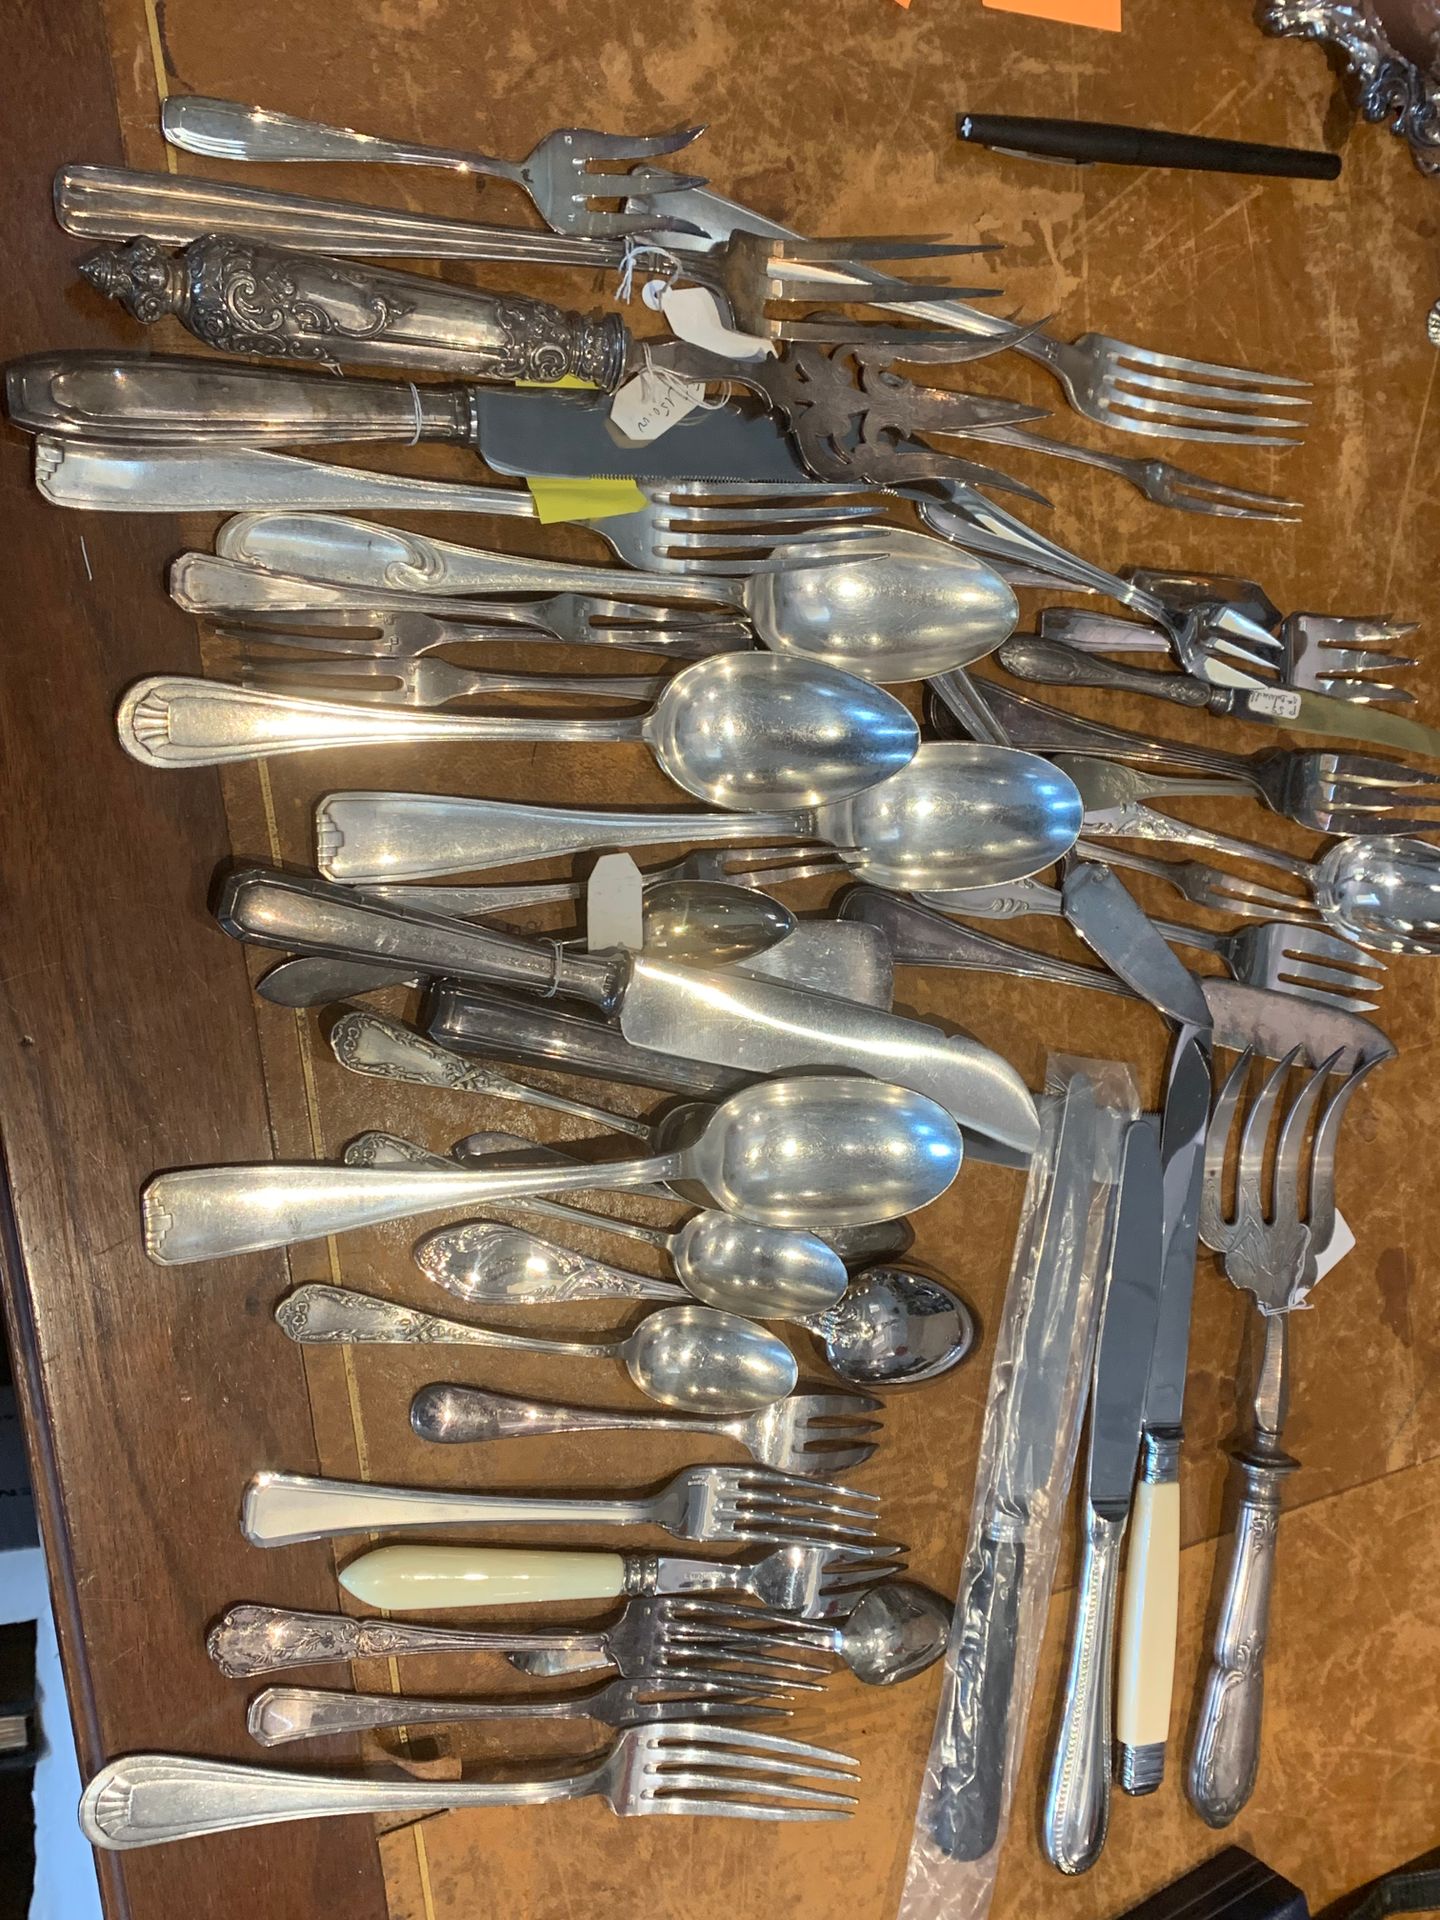 Null Lot of silver plated cutlery including :
- 12 forks and 9 spoons, uniplat m&hellip;